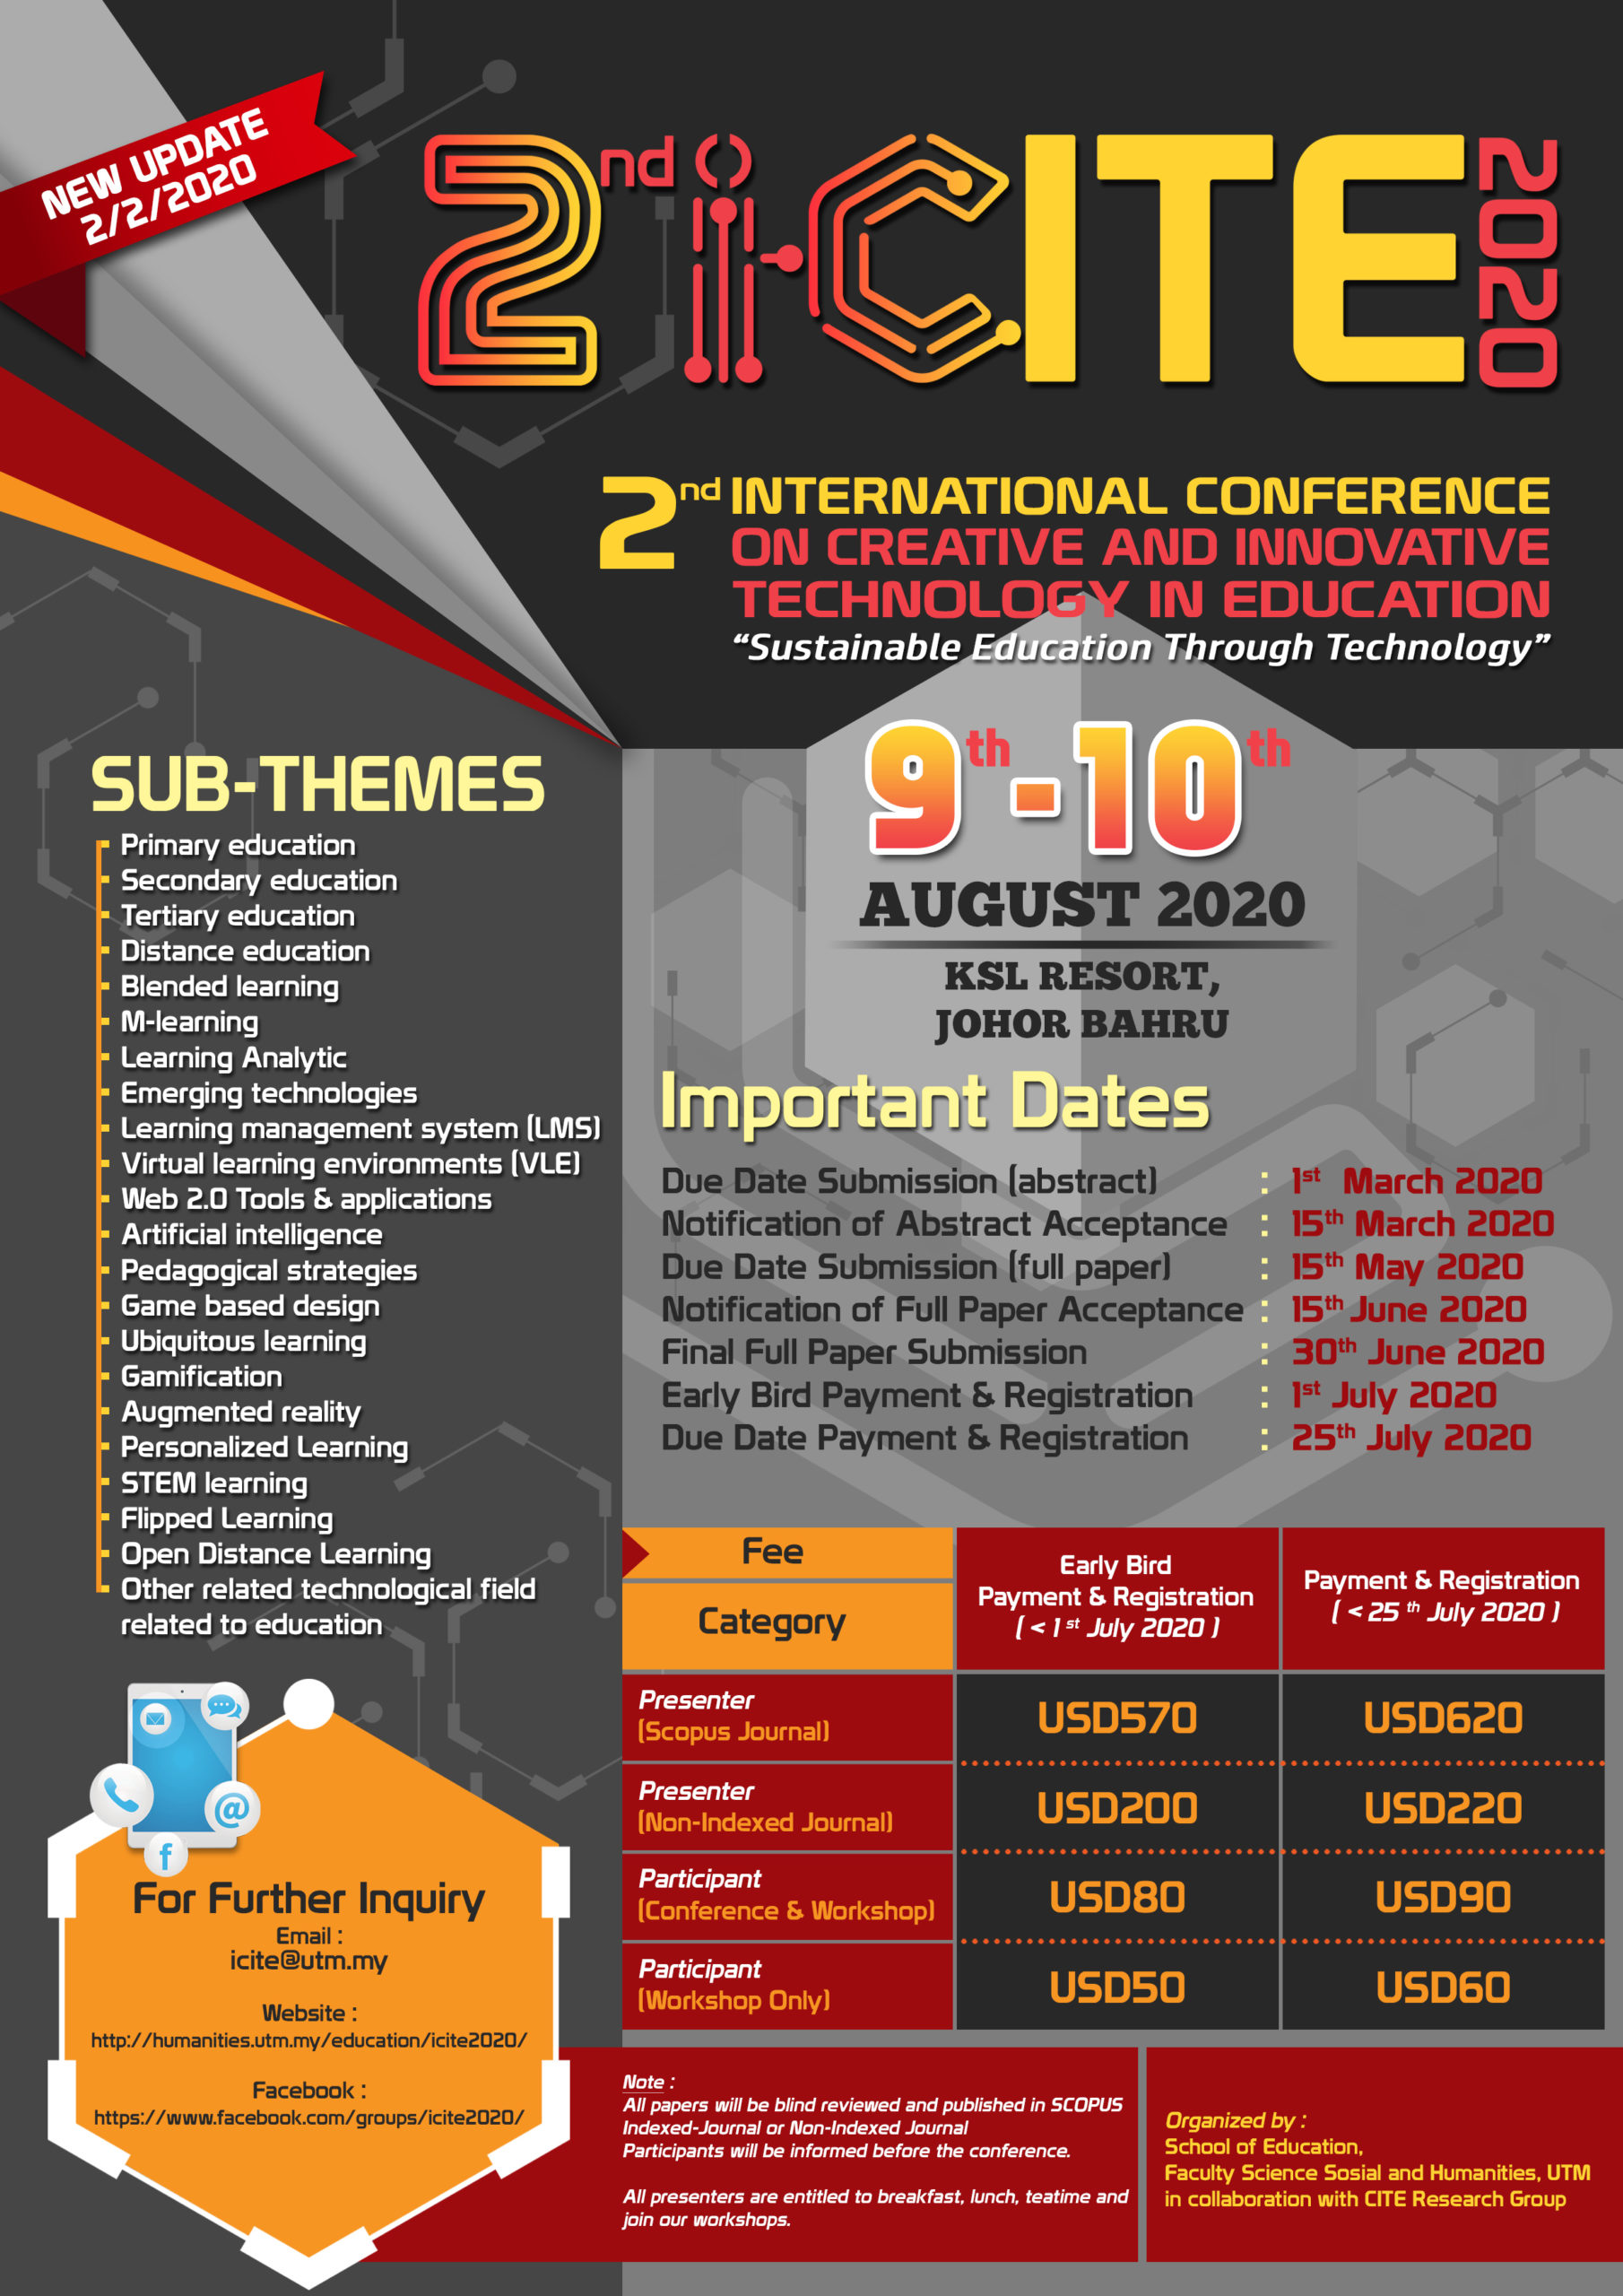 2nd INTERNATIONAL CONFERENCE ON CREATIVE AND INNOVATIVE TECHNOLOGY IN EDUCATION 2020 (i-CITE 2020) @ JOHOR BAHRU